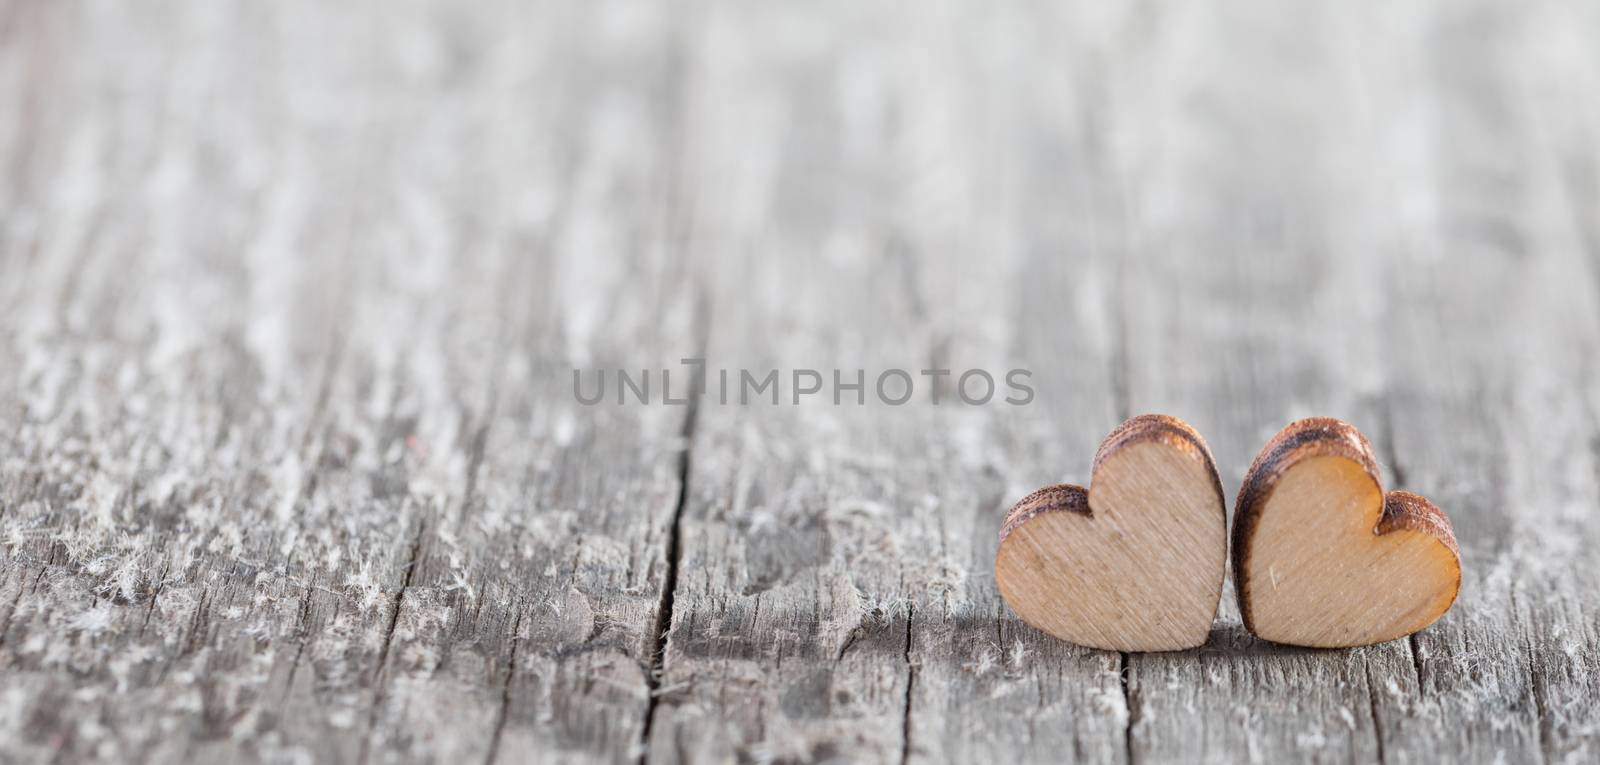 Two small wooden hearts on old cracked wood background